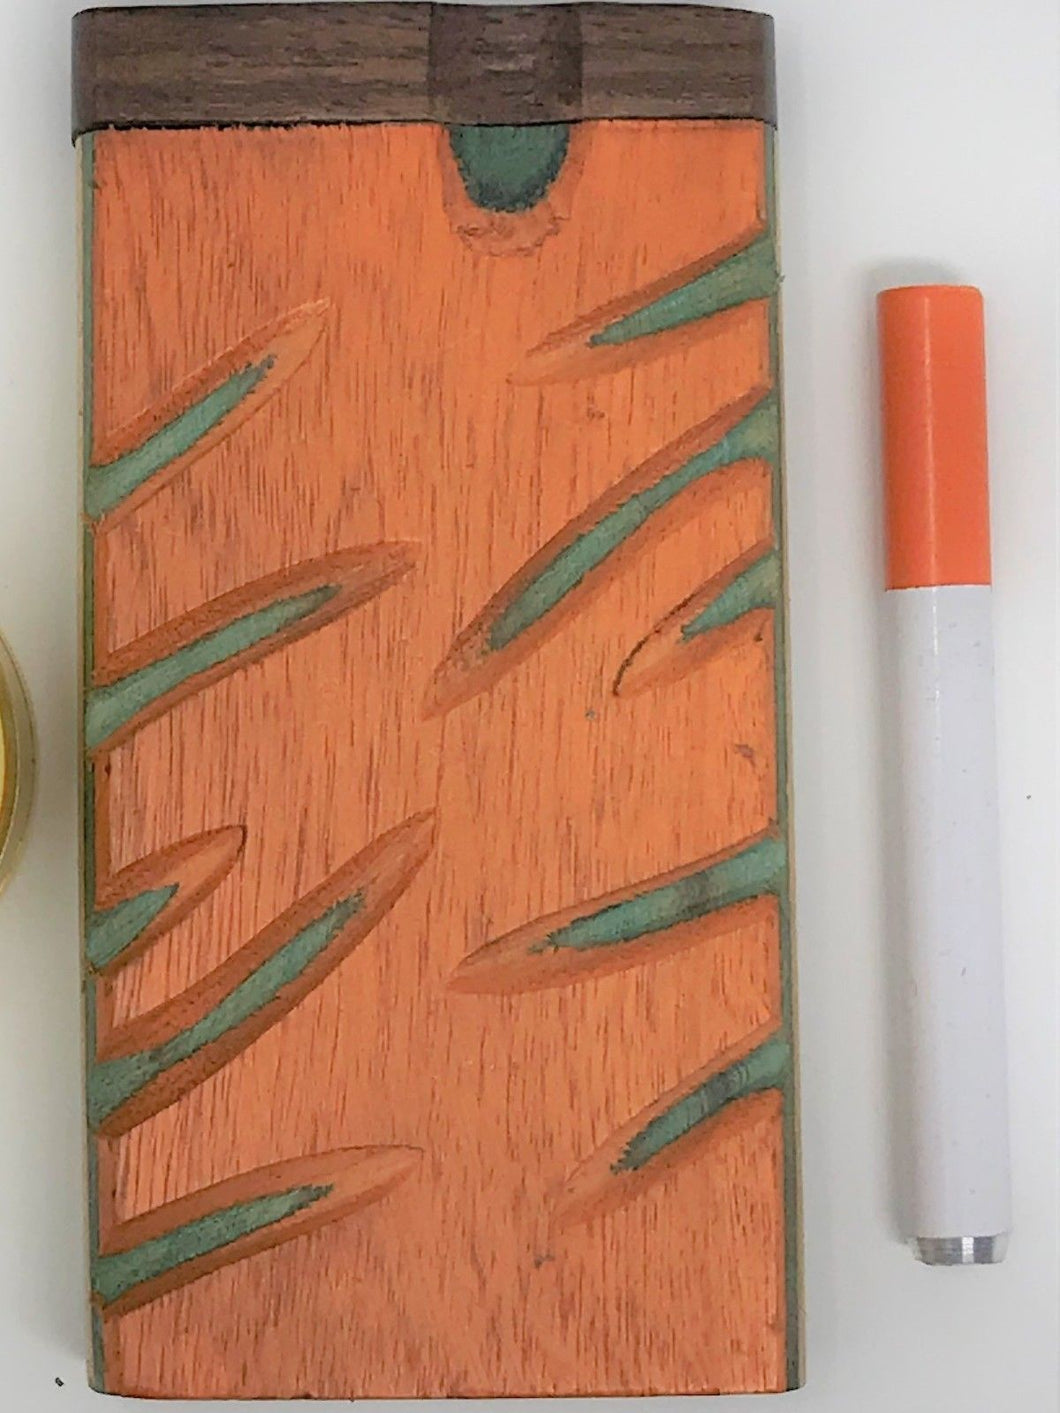 Carved Wood Dugout with metal bat (Orange and Green) - Volo Smoke and Vape